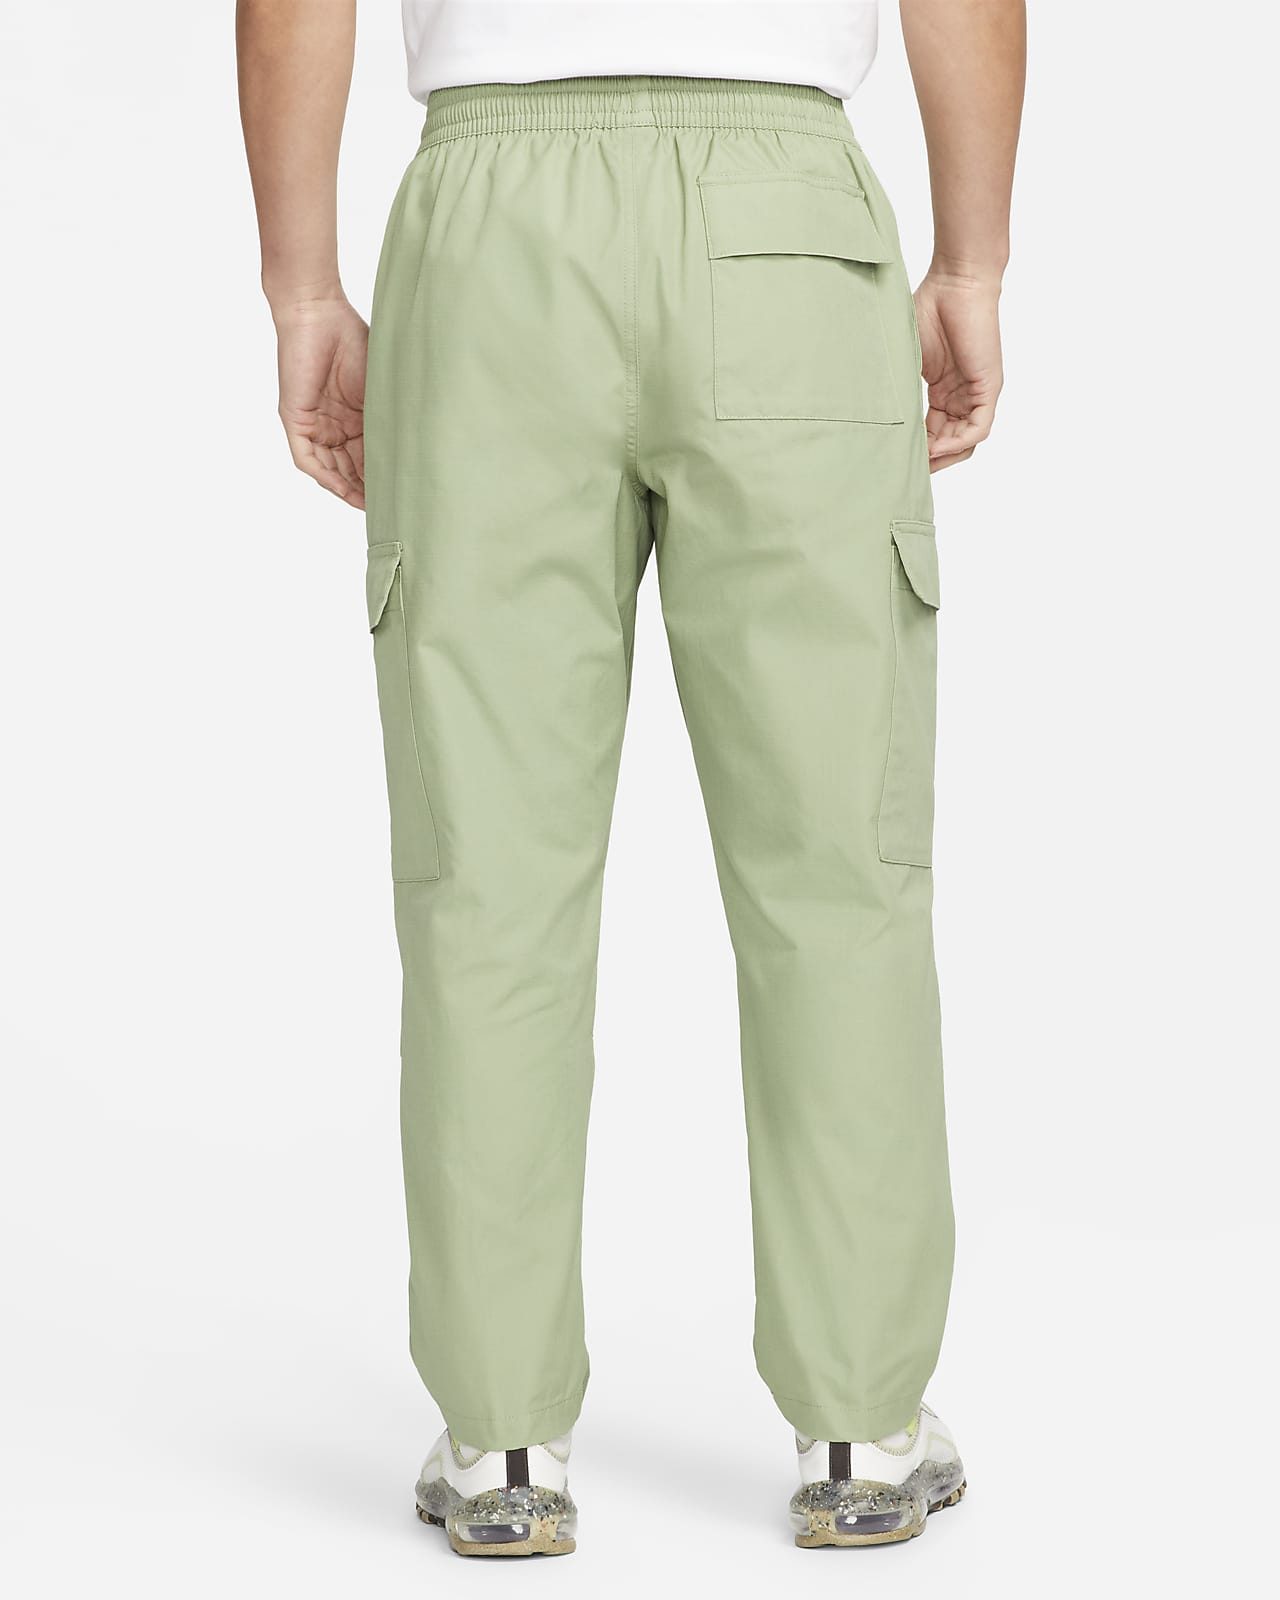 By City Men's Mixed Cargo Trousers - Military Green - Salt Flats Clothing